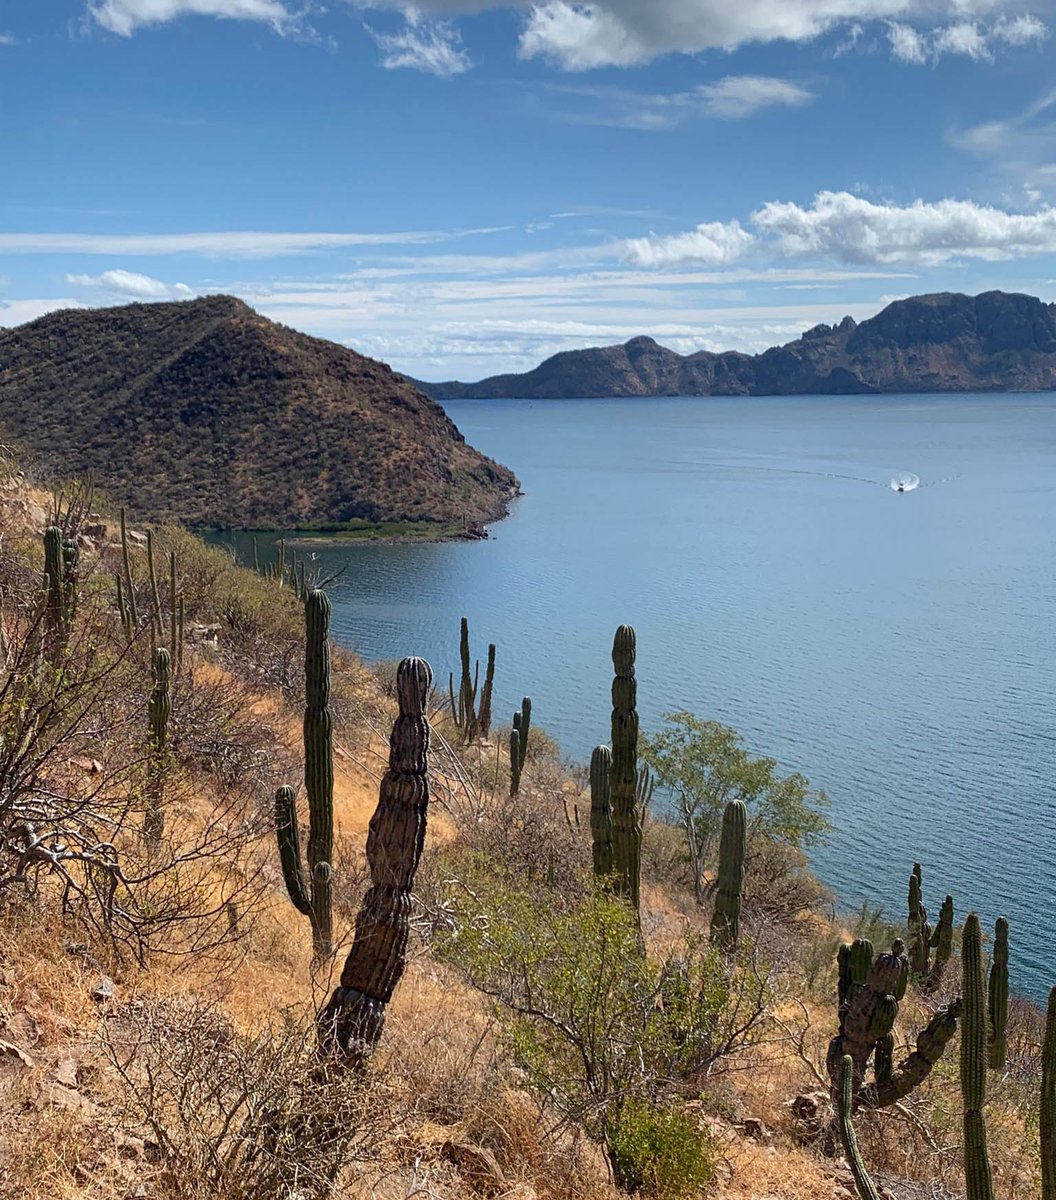 Loreto is one of Mexico's best kept secrets with rugged mountains and crystal clear waters. 

Arrange an exchange to this 3-bedroom villa just a short stroll from #LoretoBay 🇲🇽

#Mexico #visitmexico #baja #homeswapping #travel guardianhomeexchange.co.uk/homeswap/40105